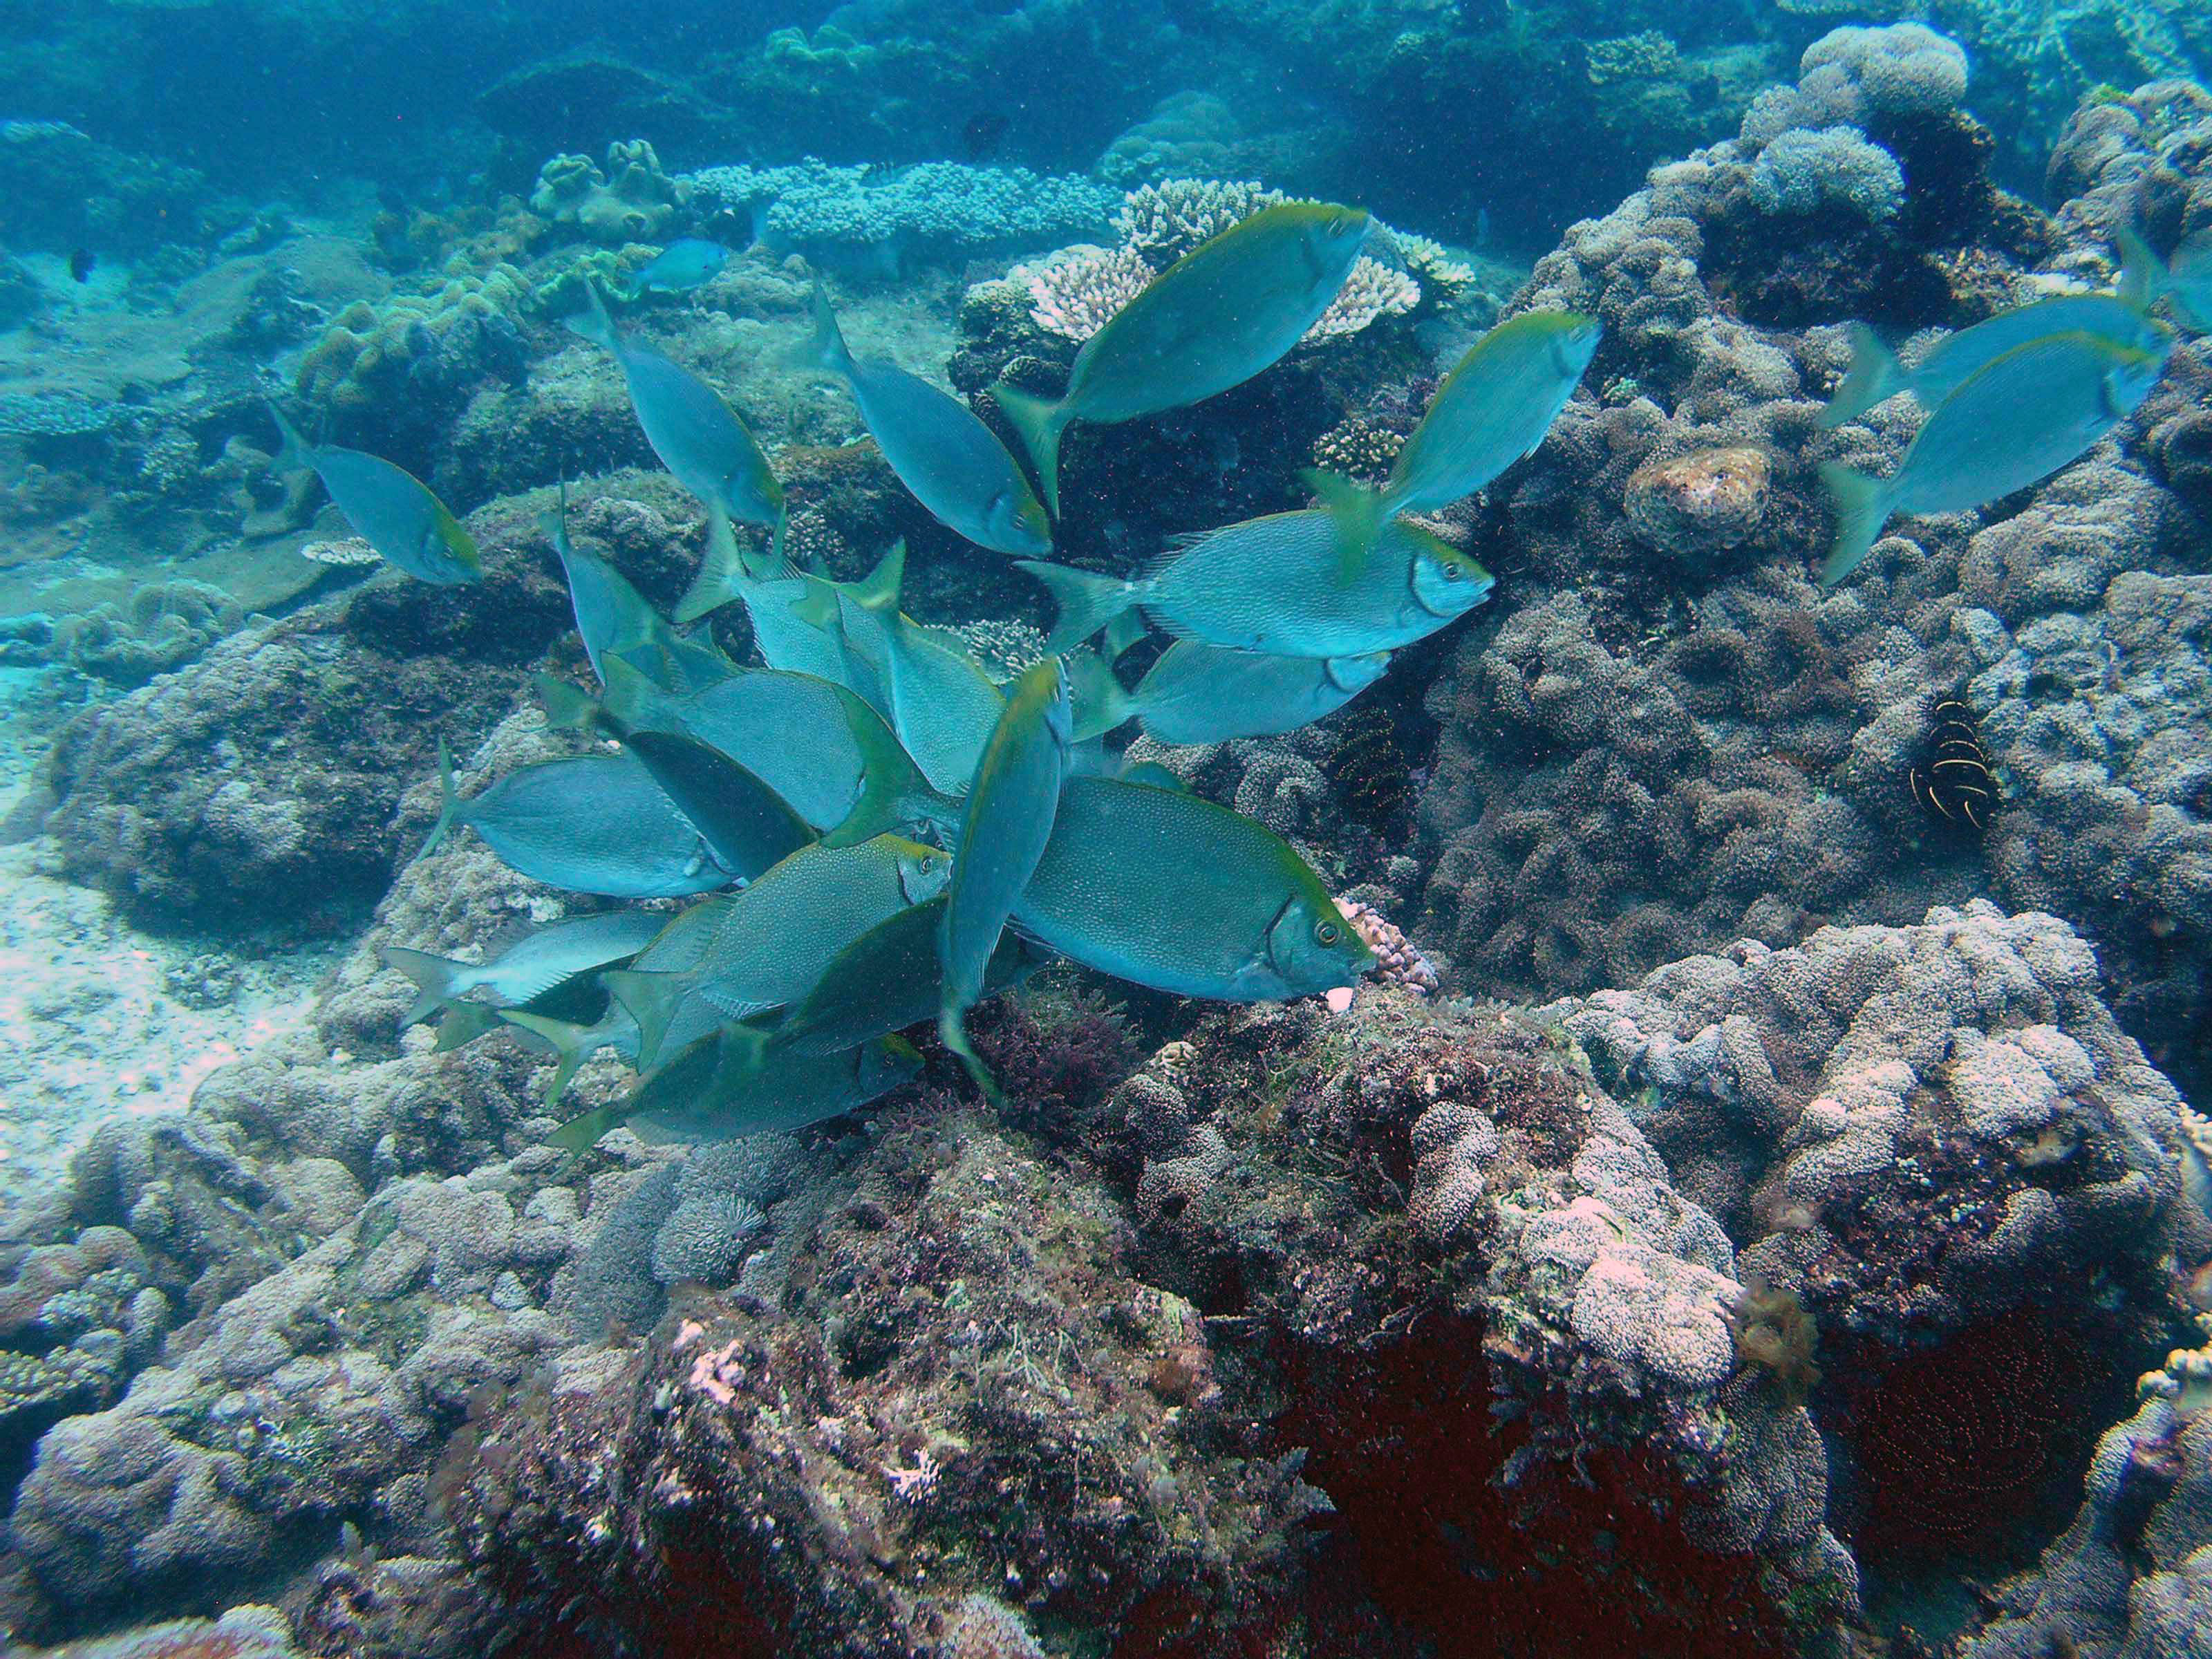 Rabbitfish grazing on coral reef